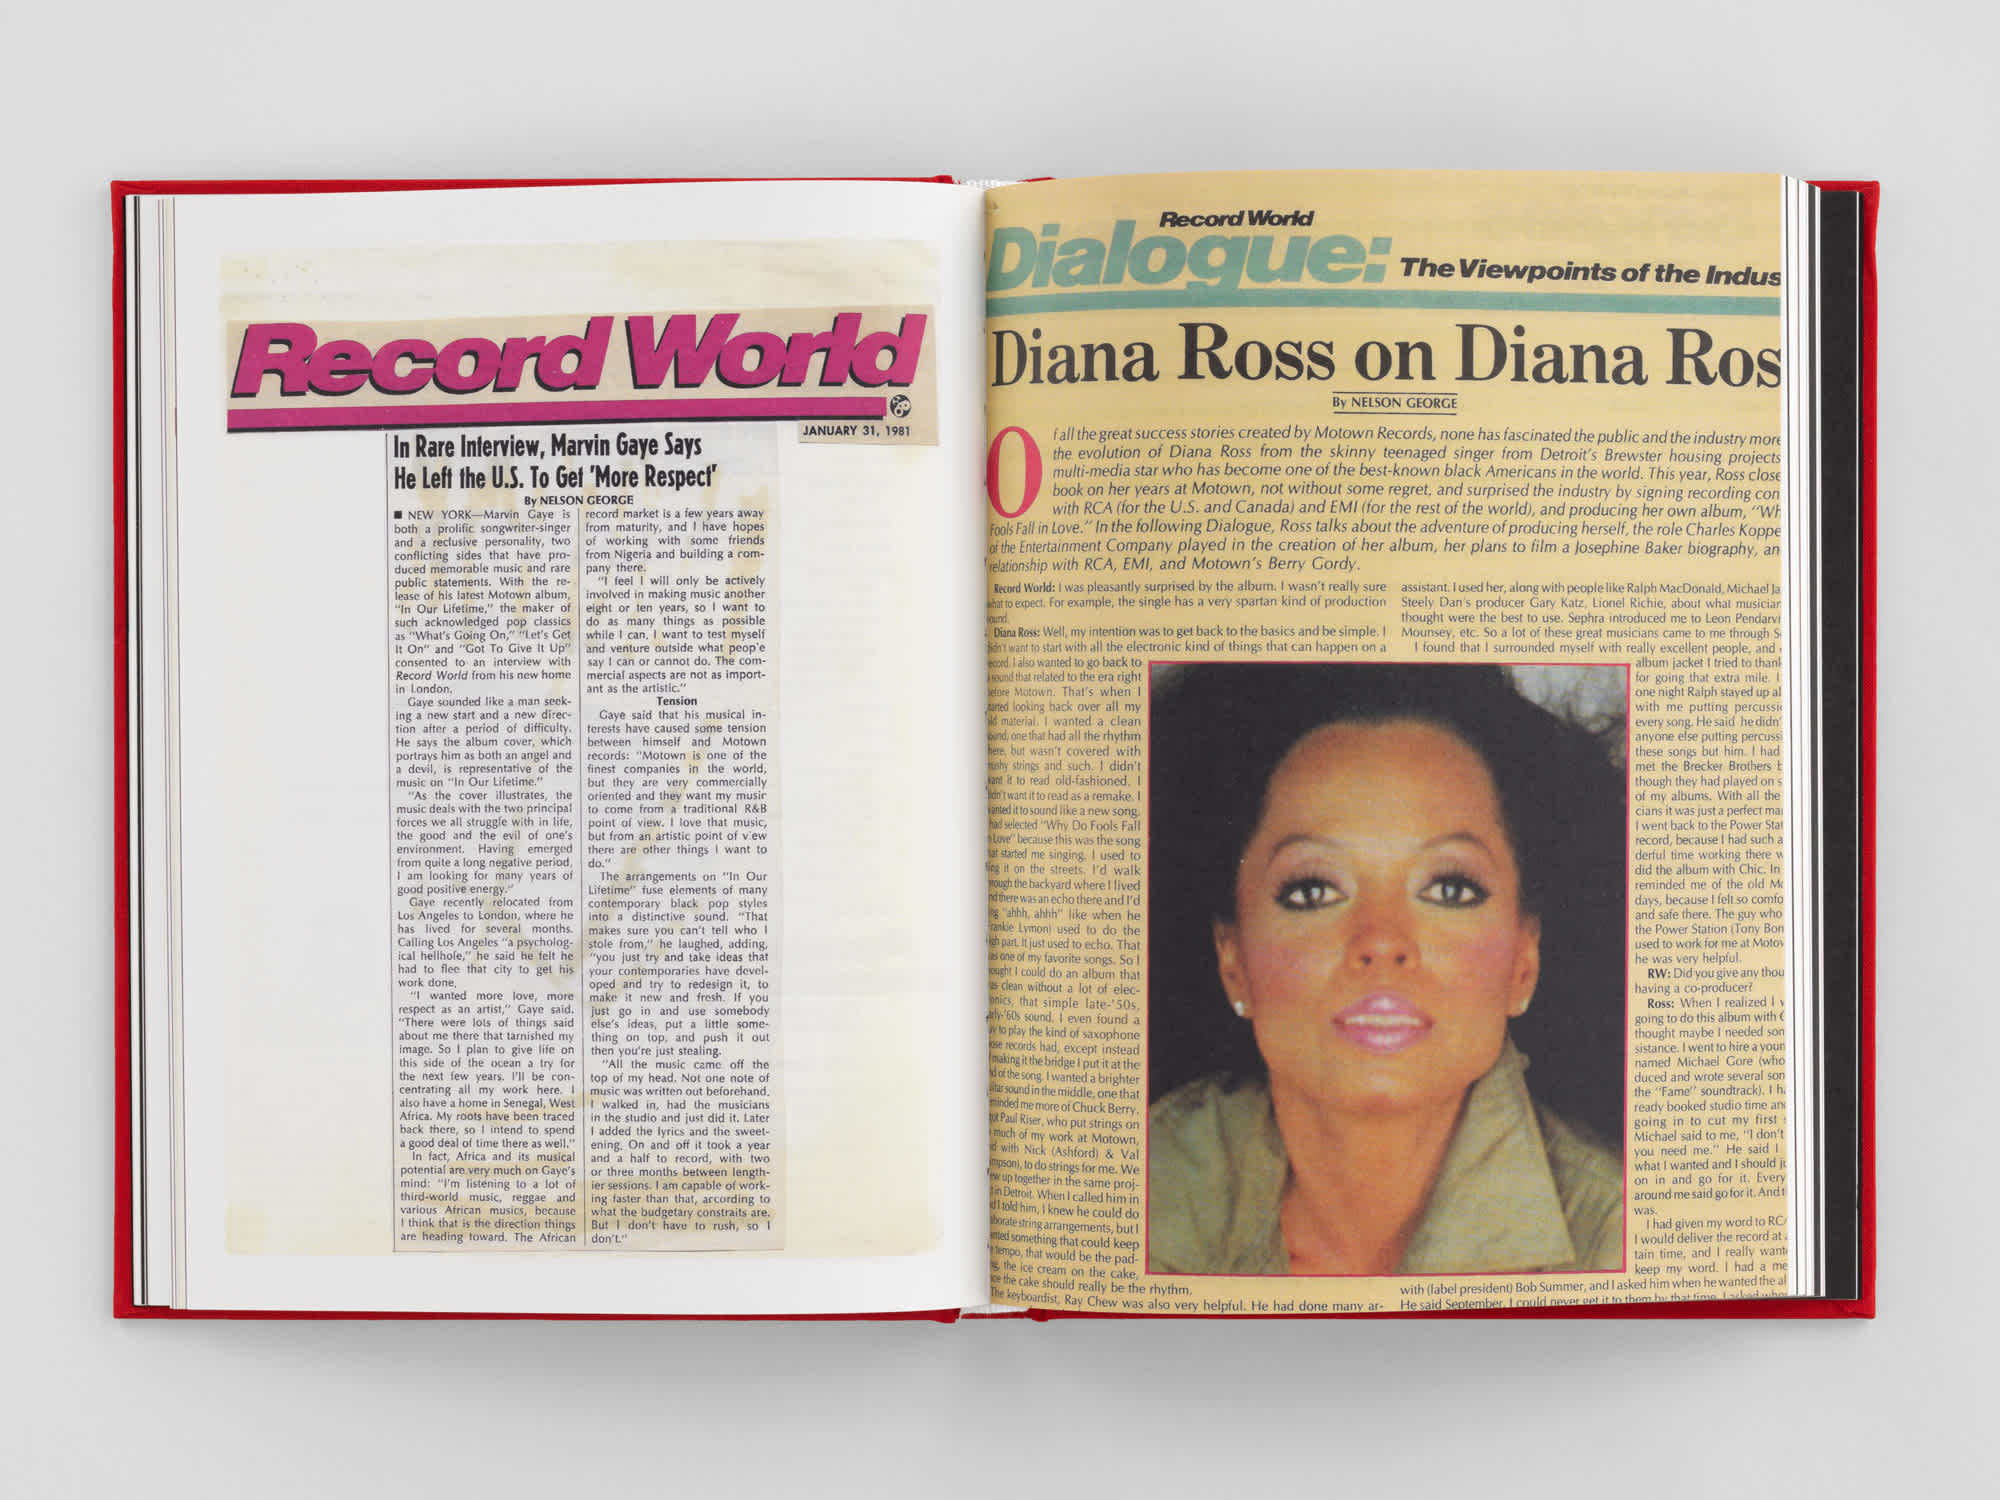 Open book with left and right pages showing newspaper clippings. The left page shows an article from "Record World". The right page has an yellowed, news clipping about Diana Ross. Her picture is featured prominently in the bottom center. 